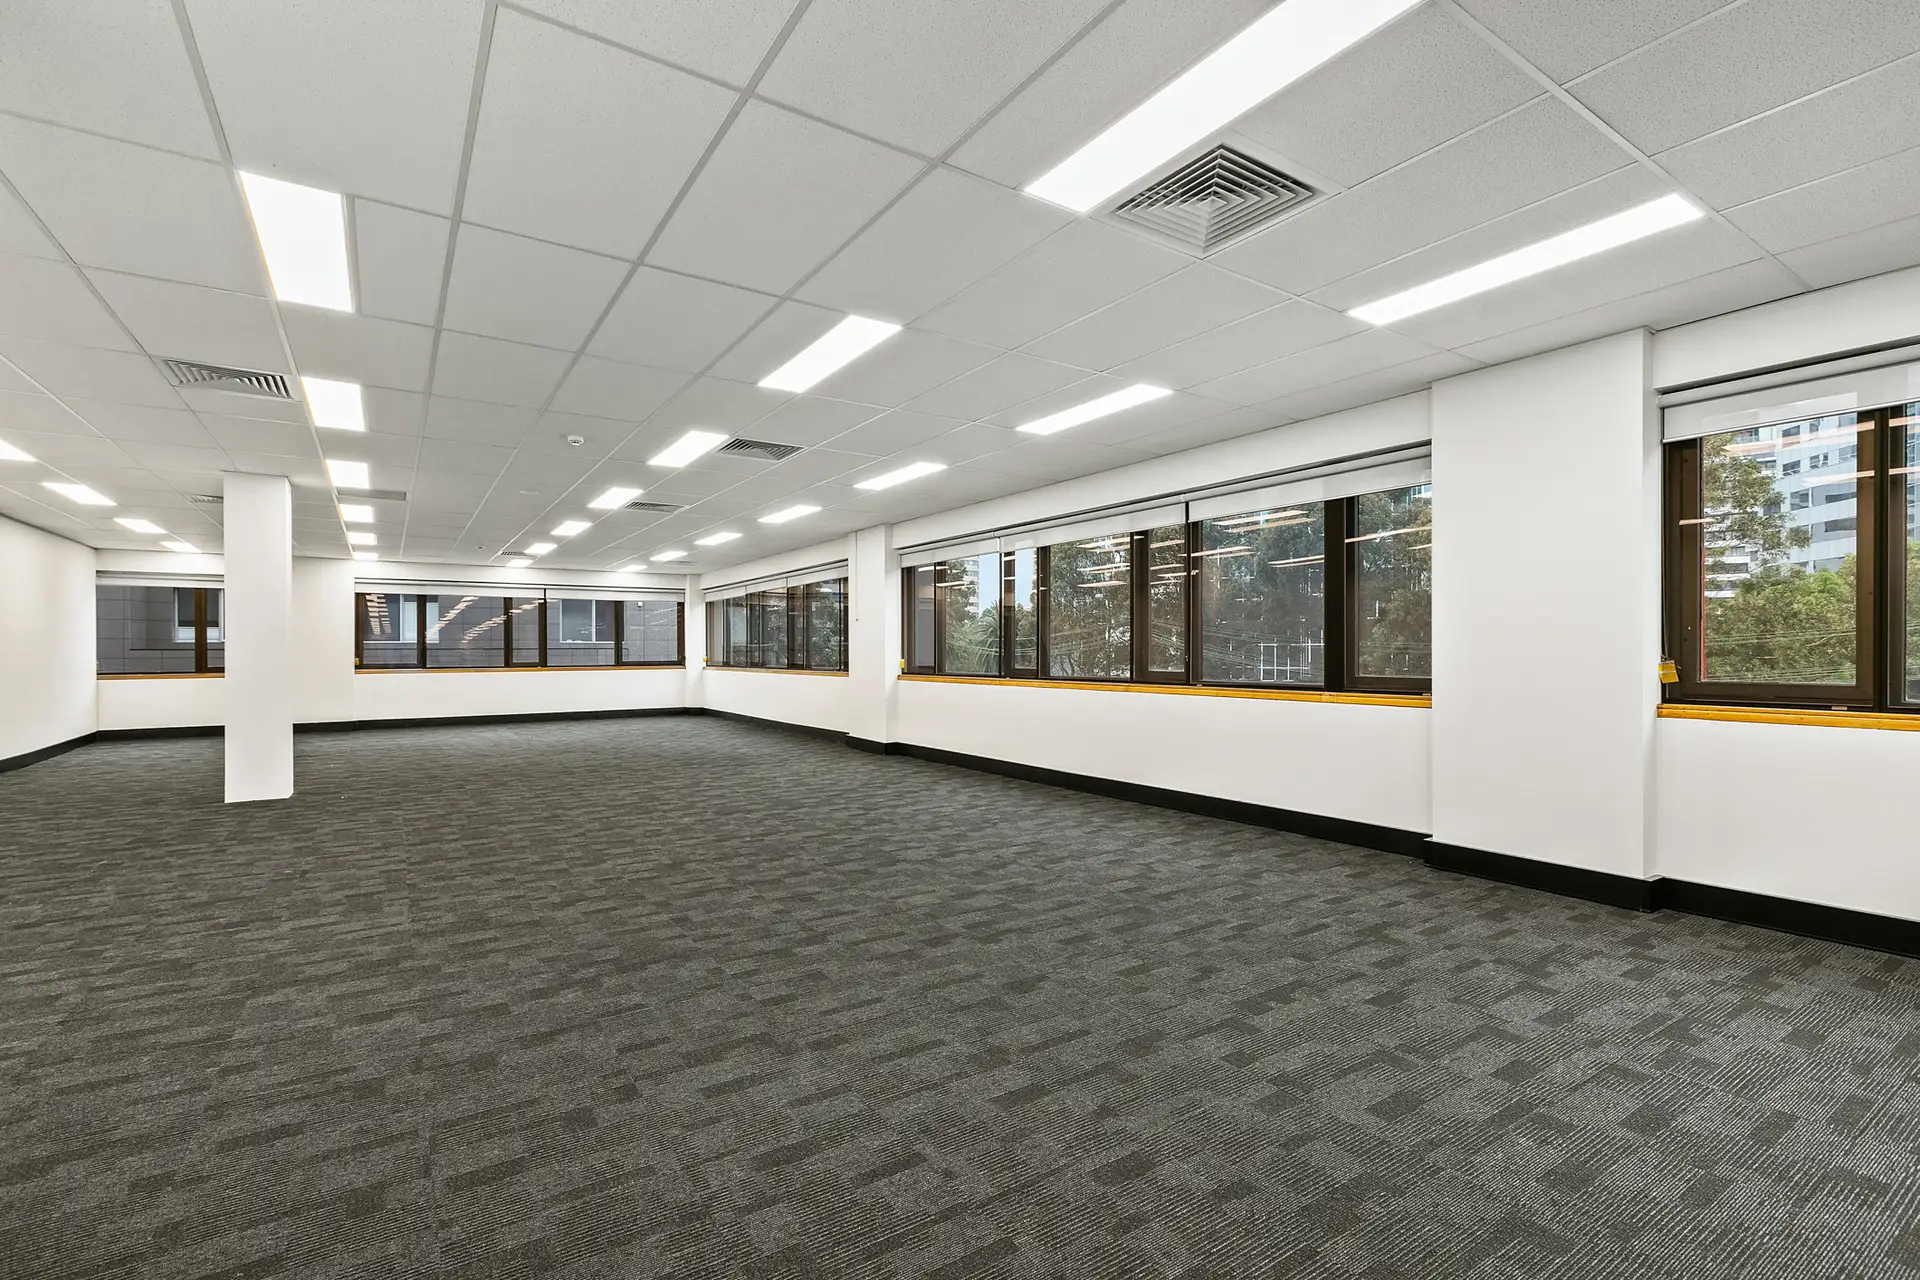 754 Pacific Highway, Chatswood For Lease by Shead Property - image 1